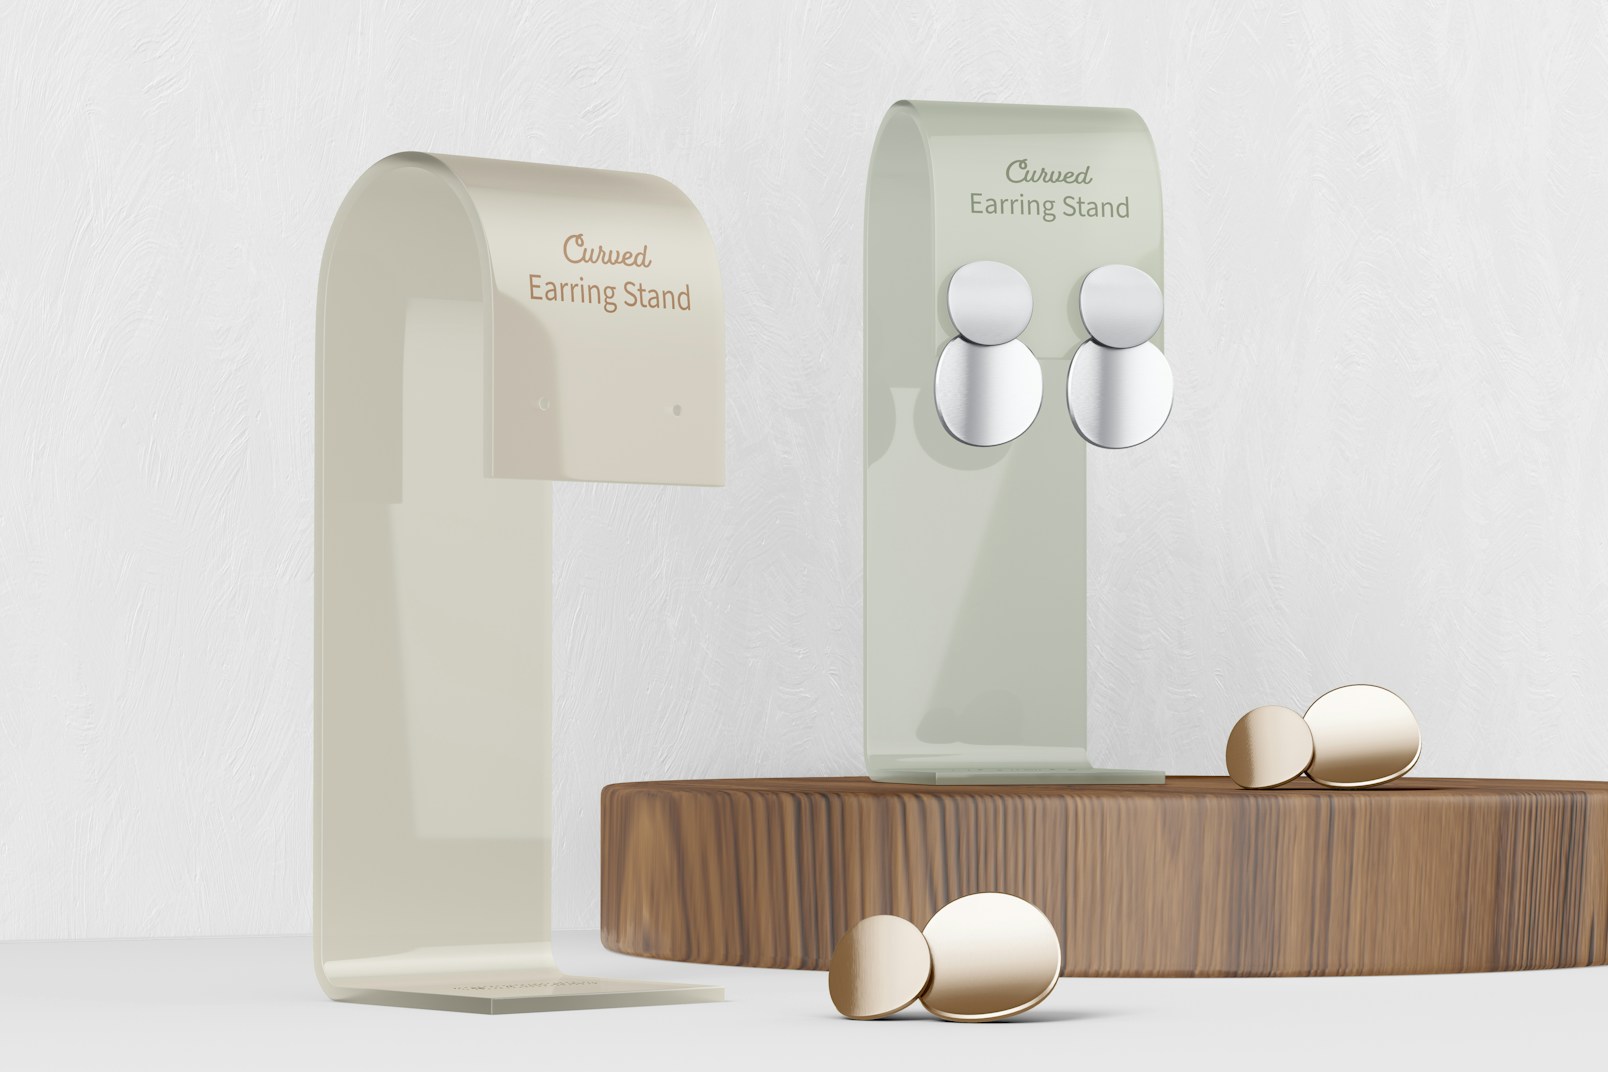 Curved Earring Stands Mockup